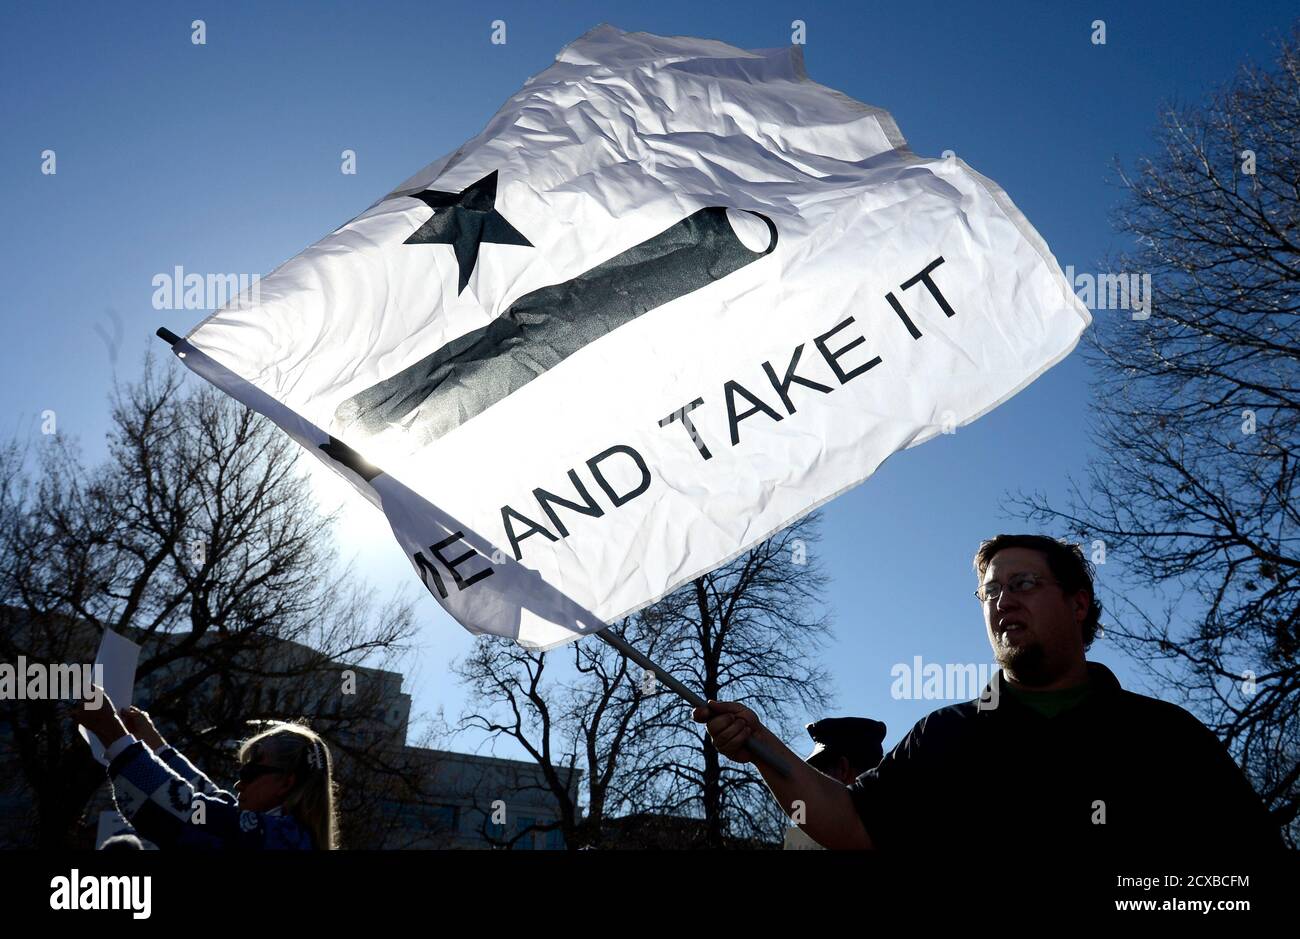 Josh Westerlund of Colorado Springs, holds a flag with a cannon pictured and the words 'Come and Take it' written on it at the Colorado State Capital Building during an anti-gun control legislation rally organized by Guns for Everyone in Denver, Colorado January 9, 2013. Vice President Joe Biden said on Wednesday the White House plans to act quickly to curb gun violence and will explore all avenues - including executive orders that would not require the approval of Congress - to try to prevent incidents like last month's massacre at a Connecticut school. REUTERS/Mark Leffingwell  (UNITED STATE Stock Photo